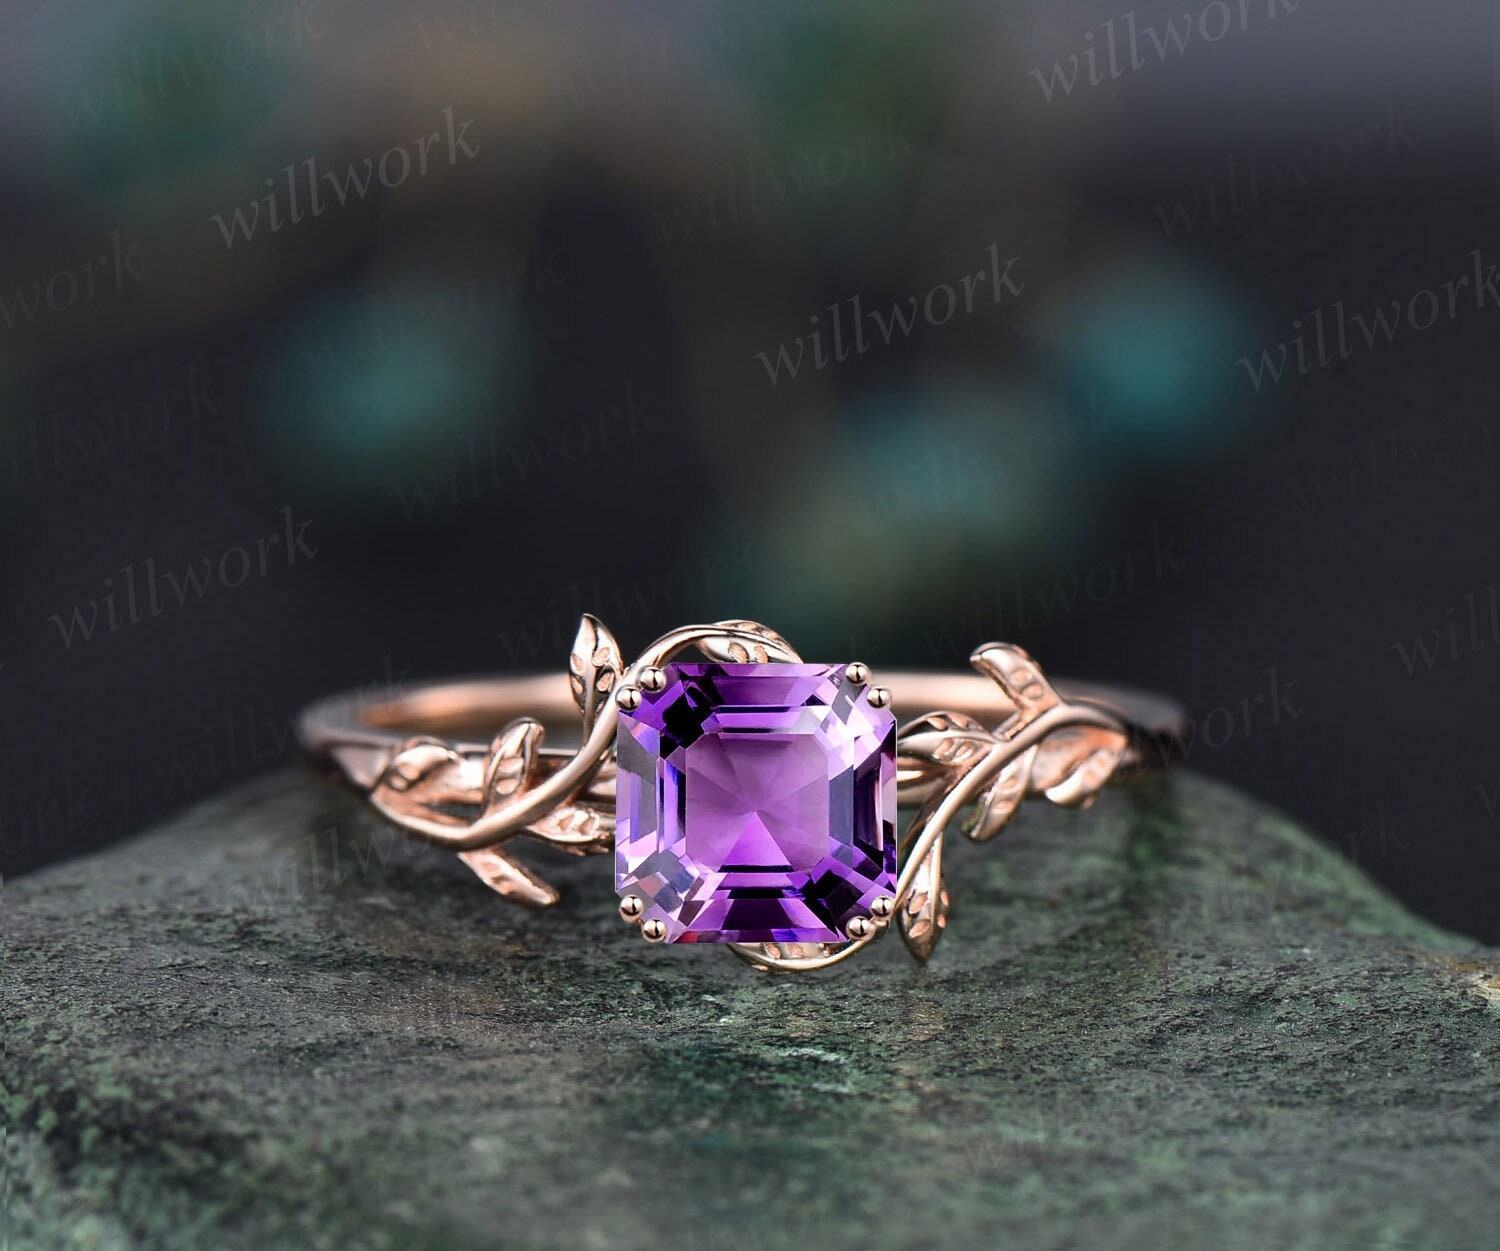 Amethyst ring vintage hexagon cut Amethyst engagement ring 14k white g –  WILLWORK JEWELRY